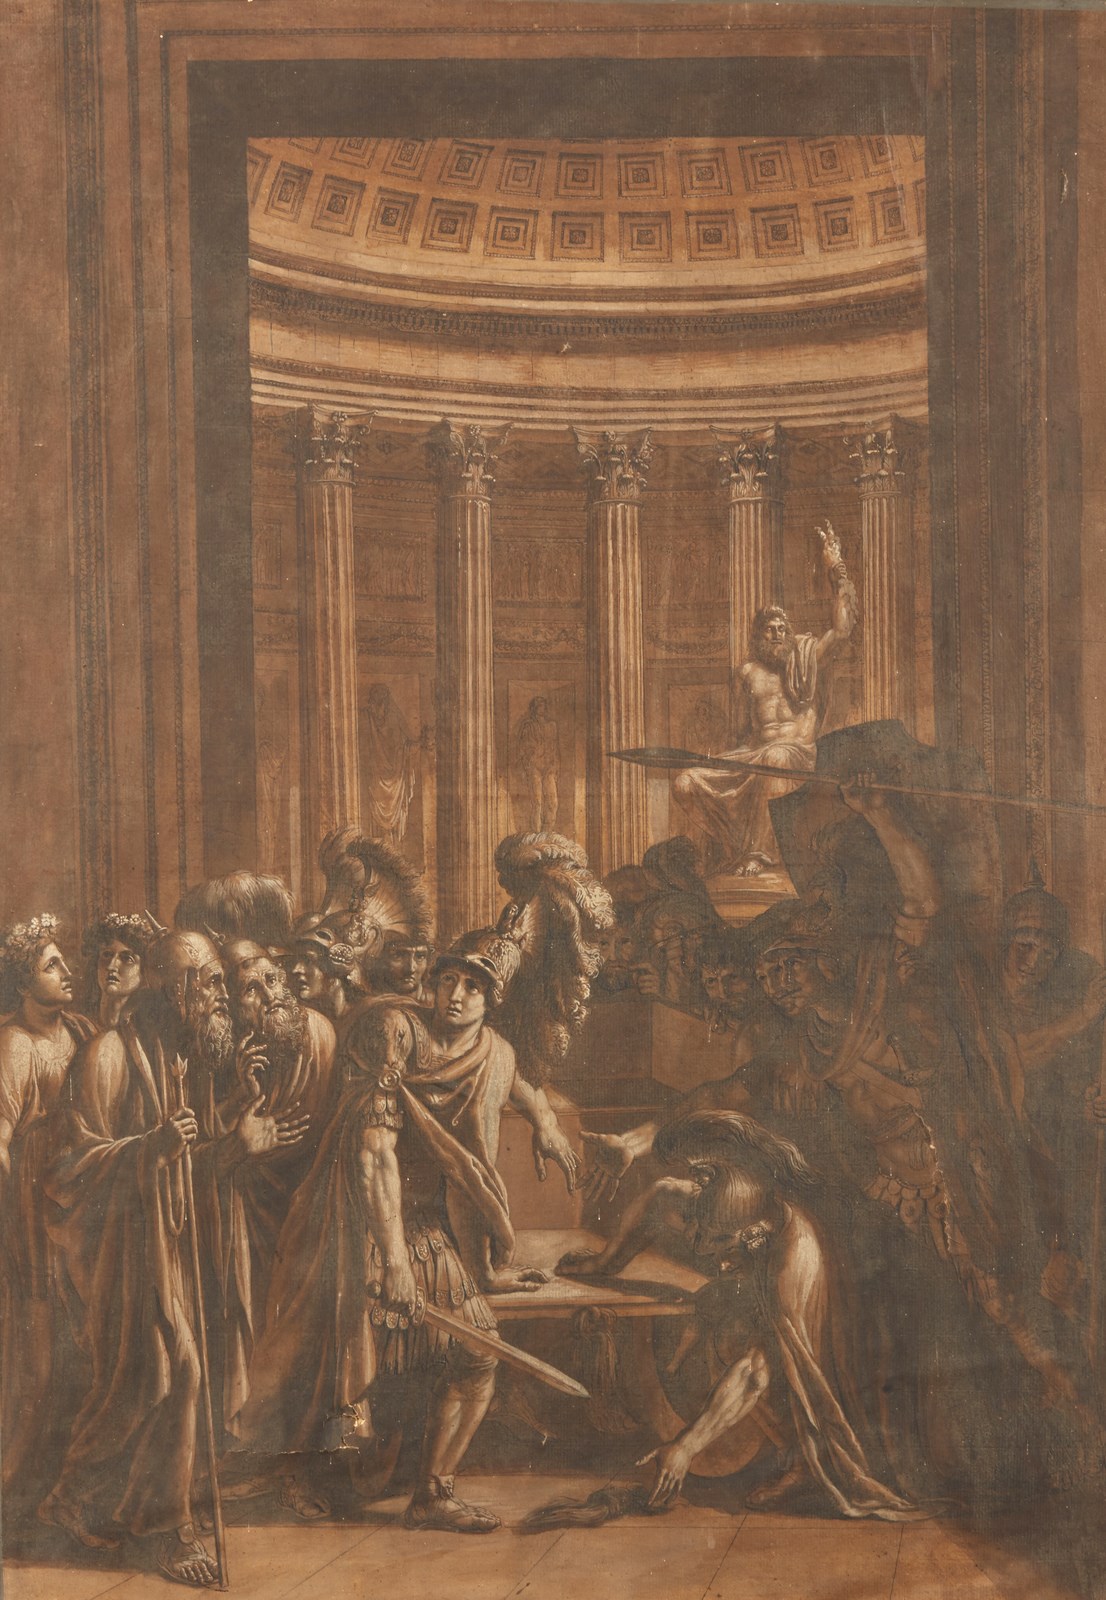 Attributed to. The Gordian knot untied by Alexander (Giuseppe Sabatelli)